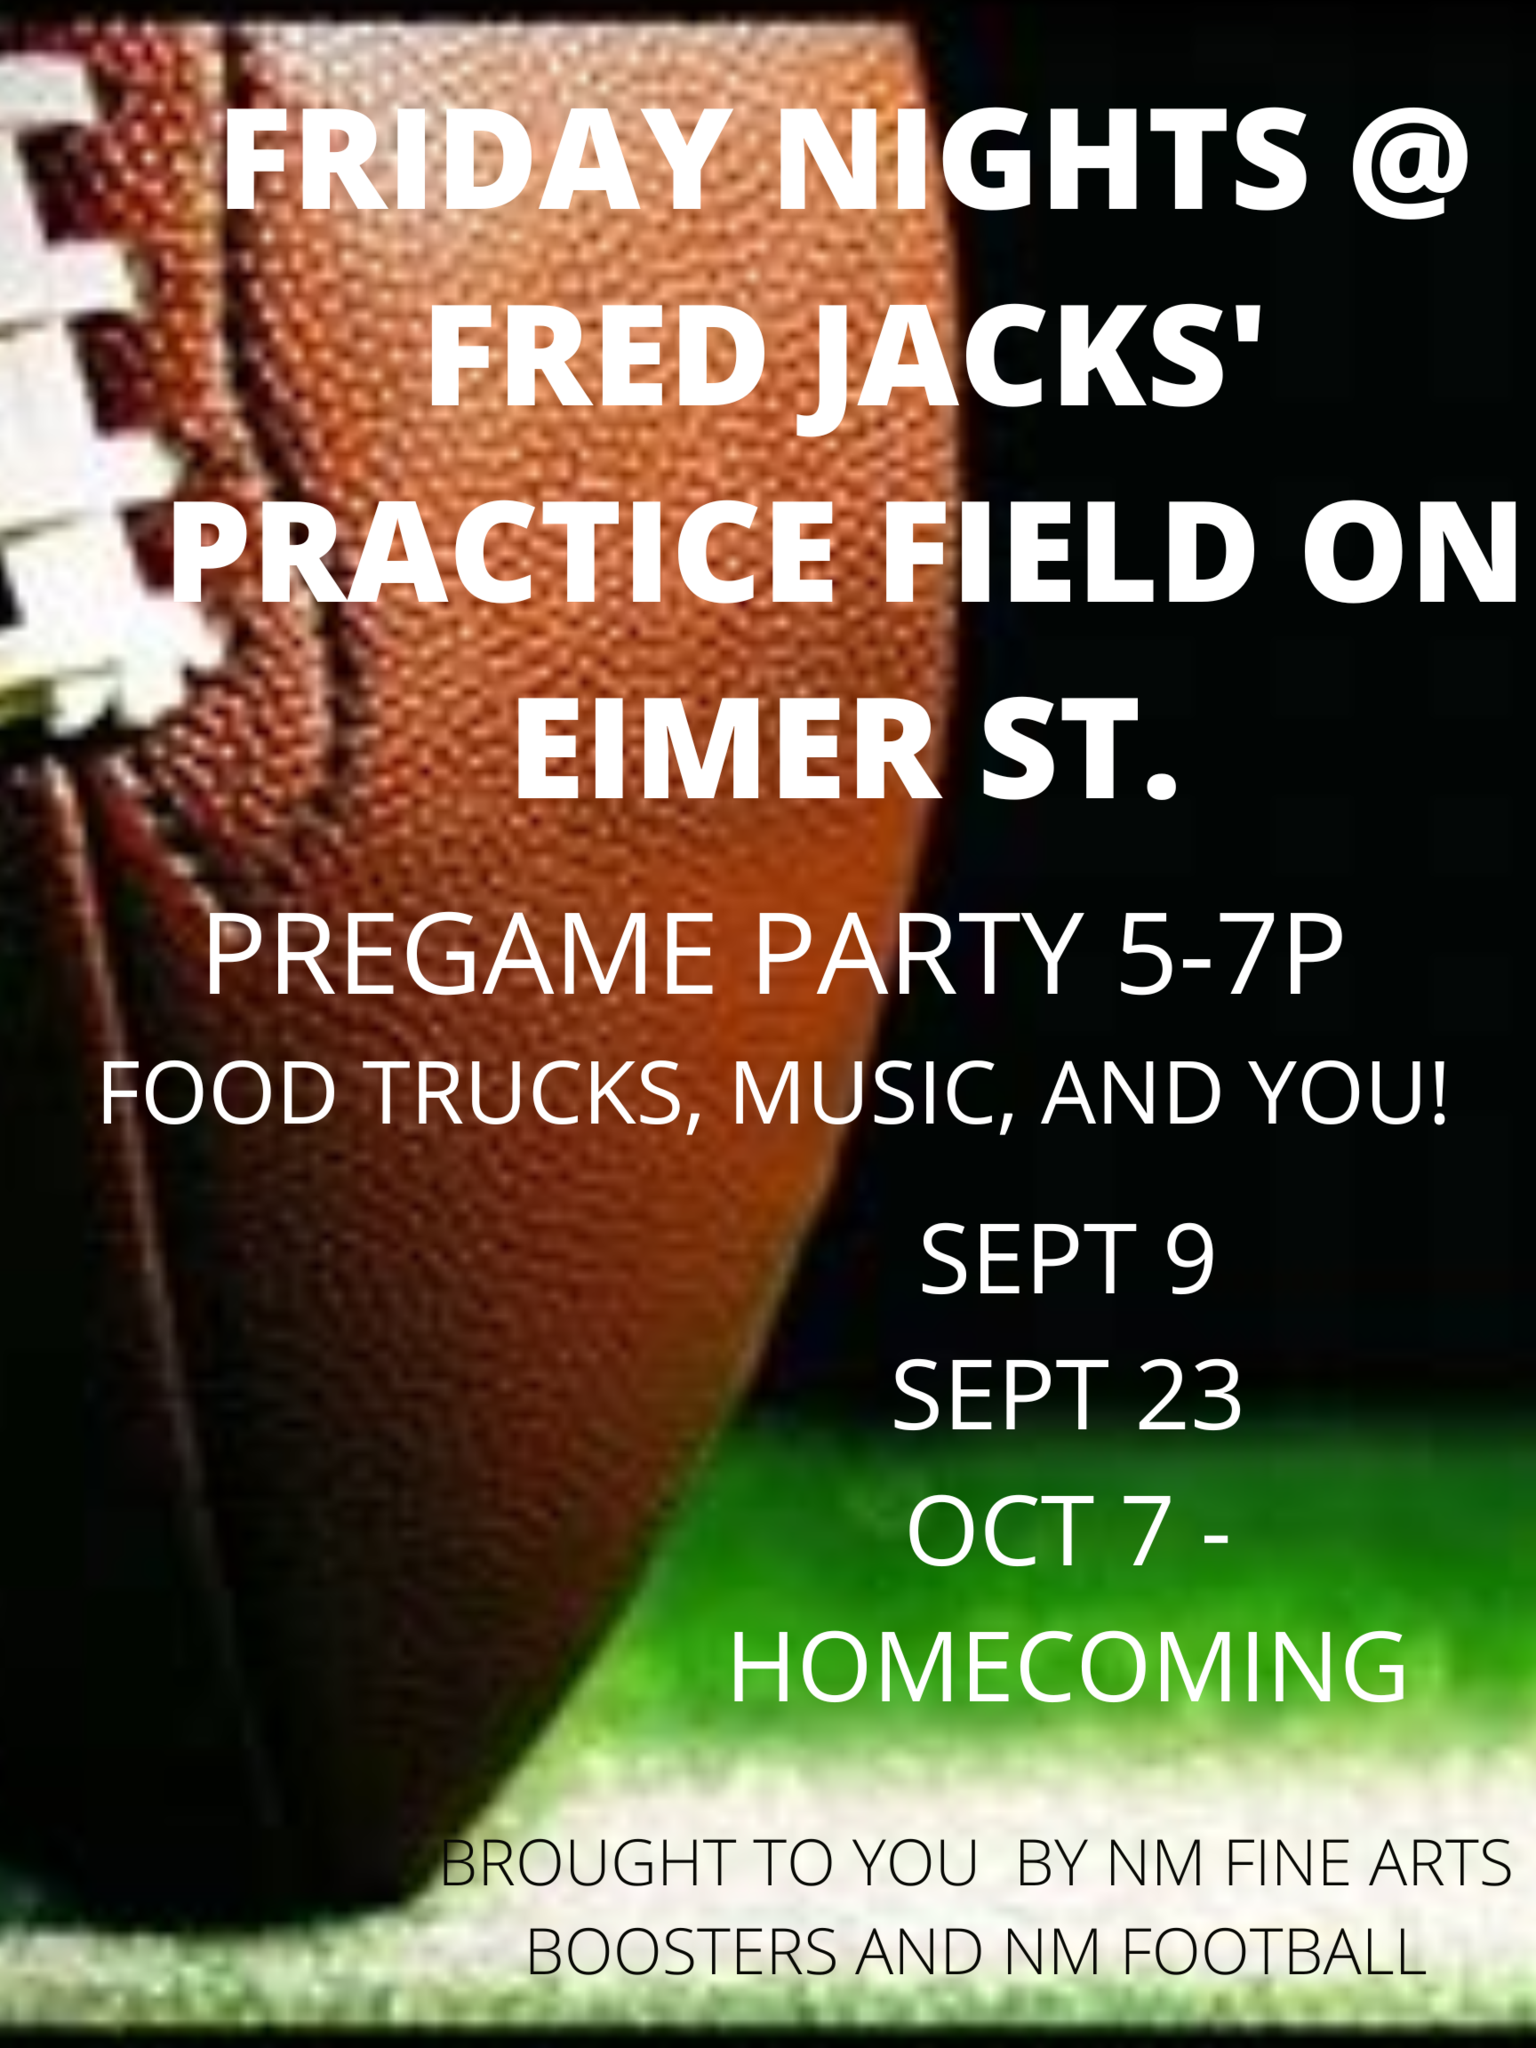 Pregame Party 5-7 pm Food Trucks, Music, and You!  9/9, 9/23, 10/7